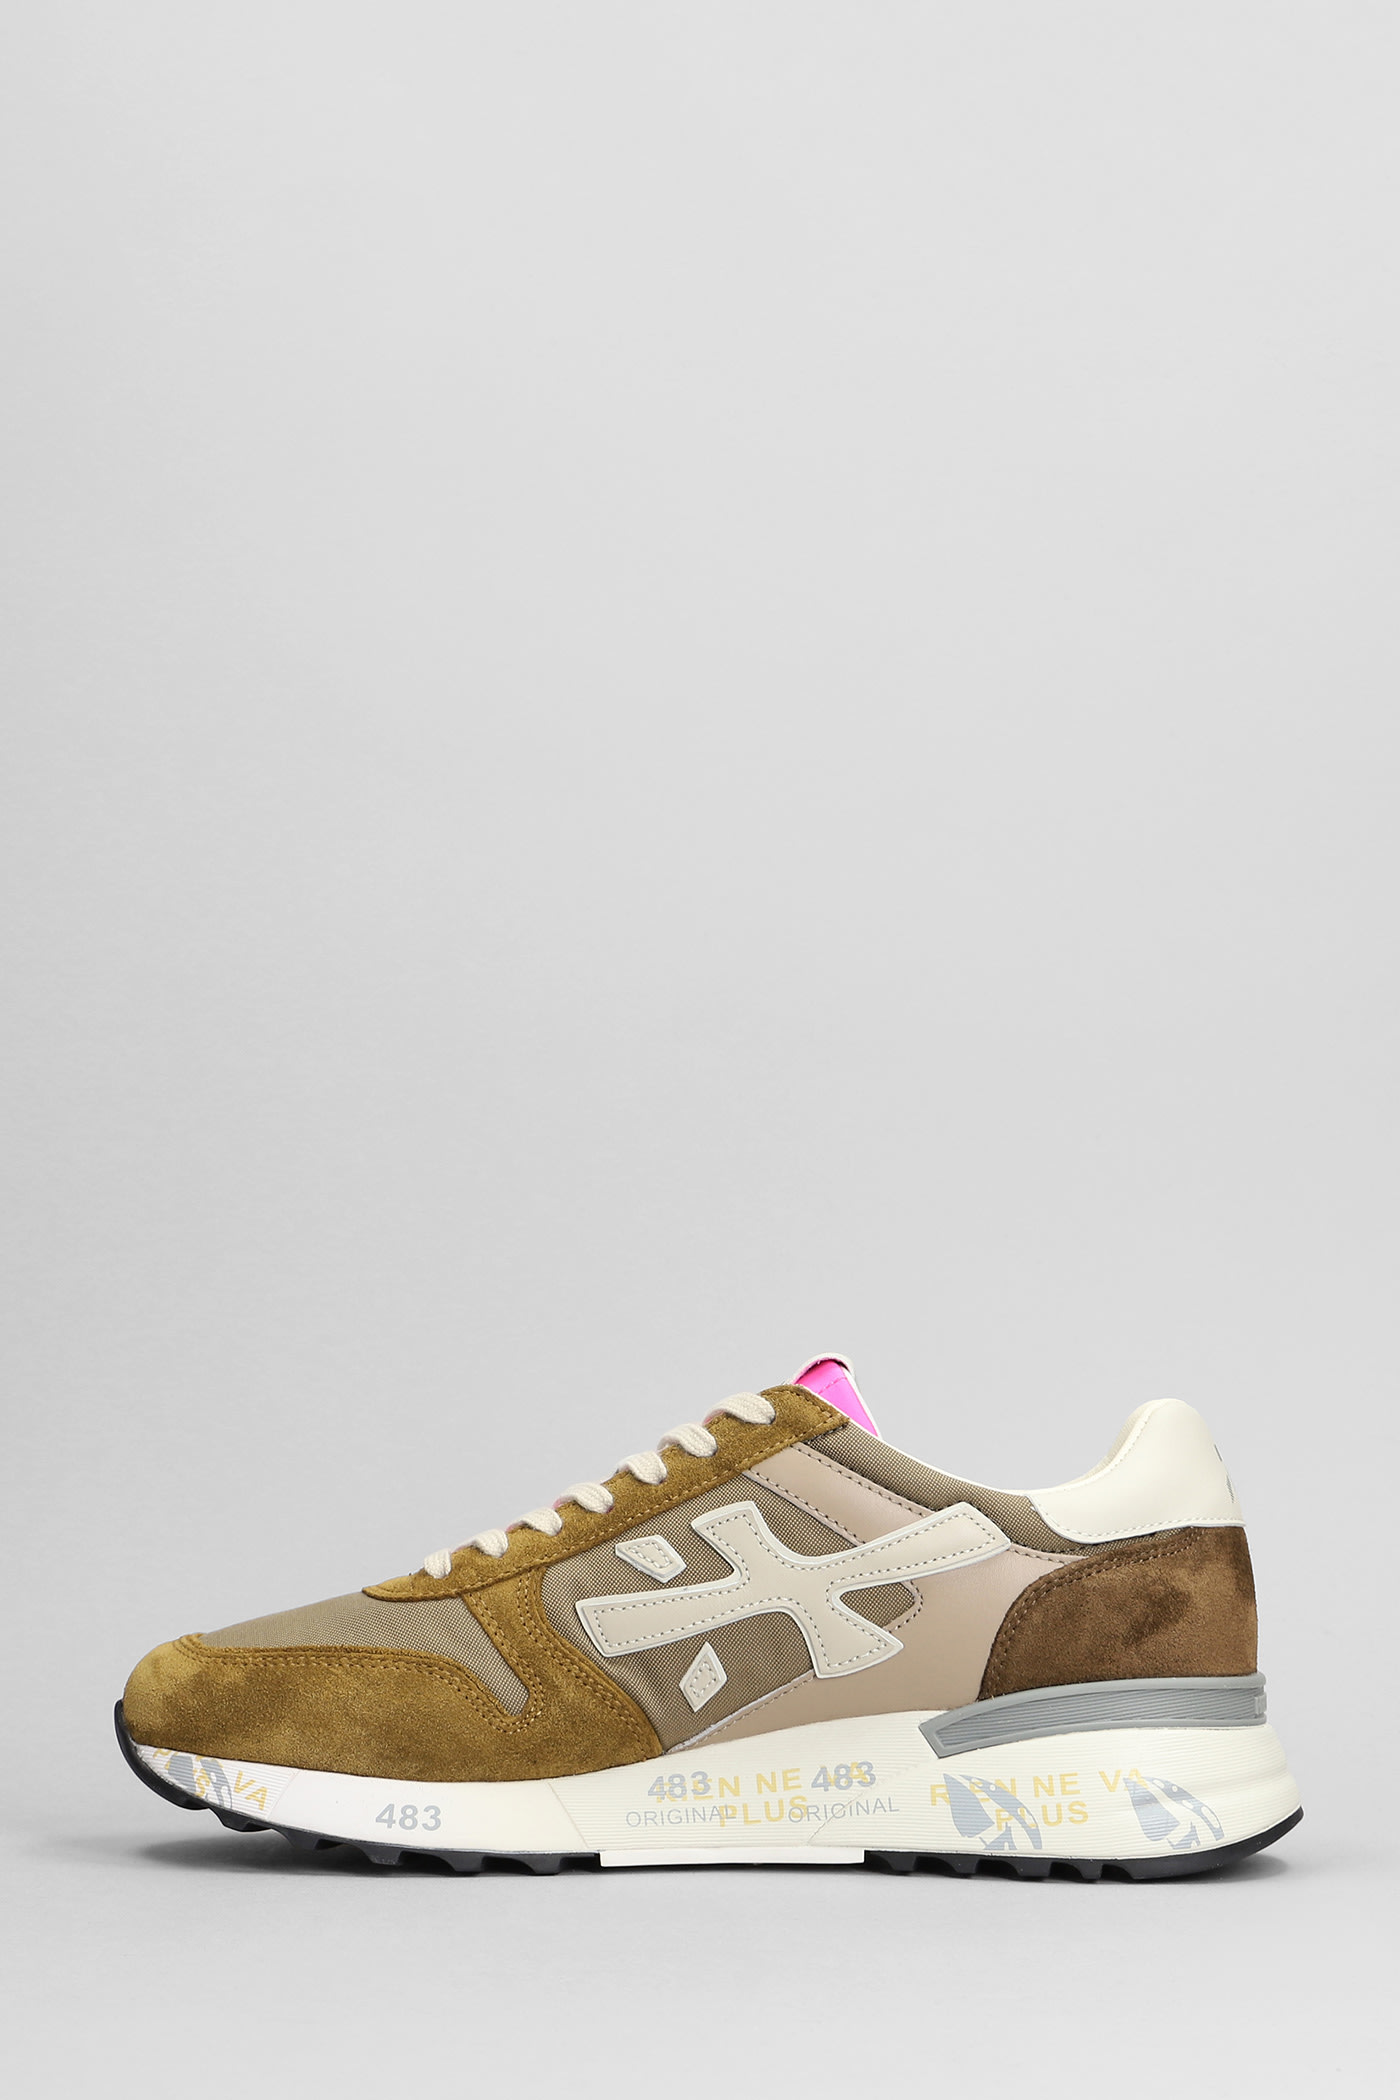 Shop Premiata Mick Sneakers In Leather Color Suede And Fabric